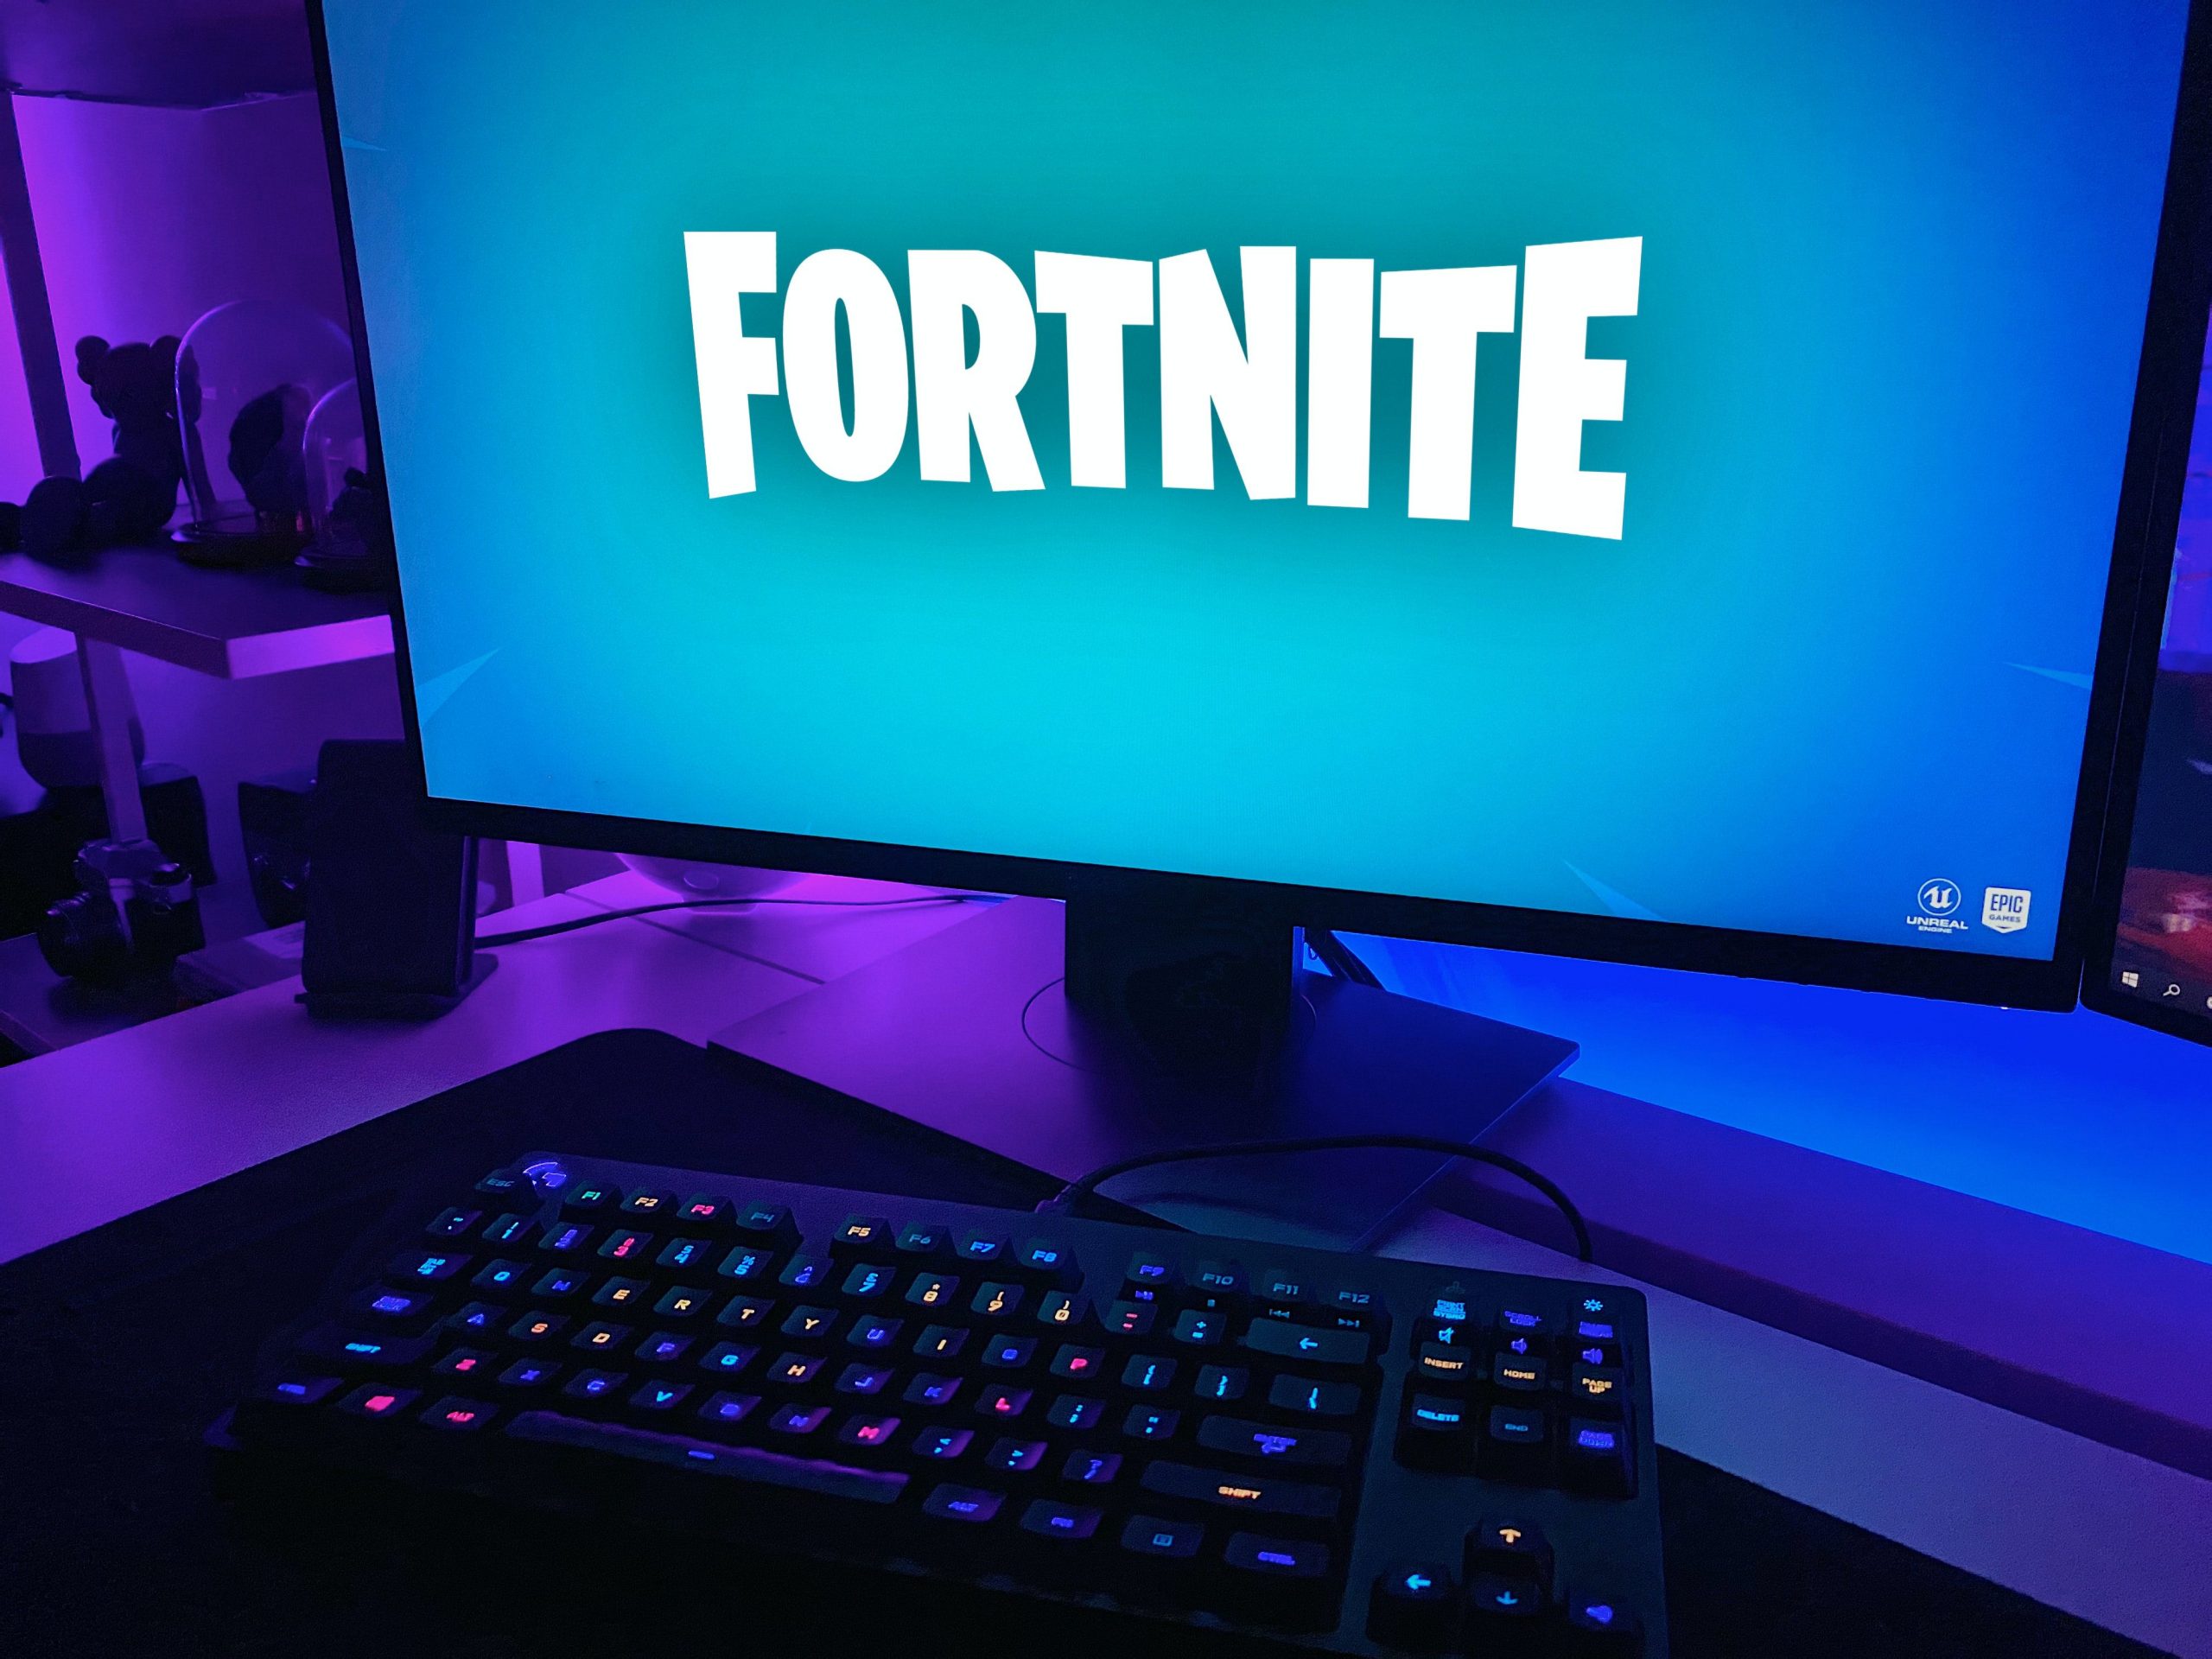 Epic to pull plug on Chinese Fortnite as Beijing cracks down on tech